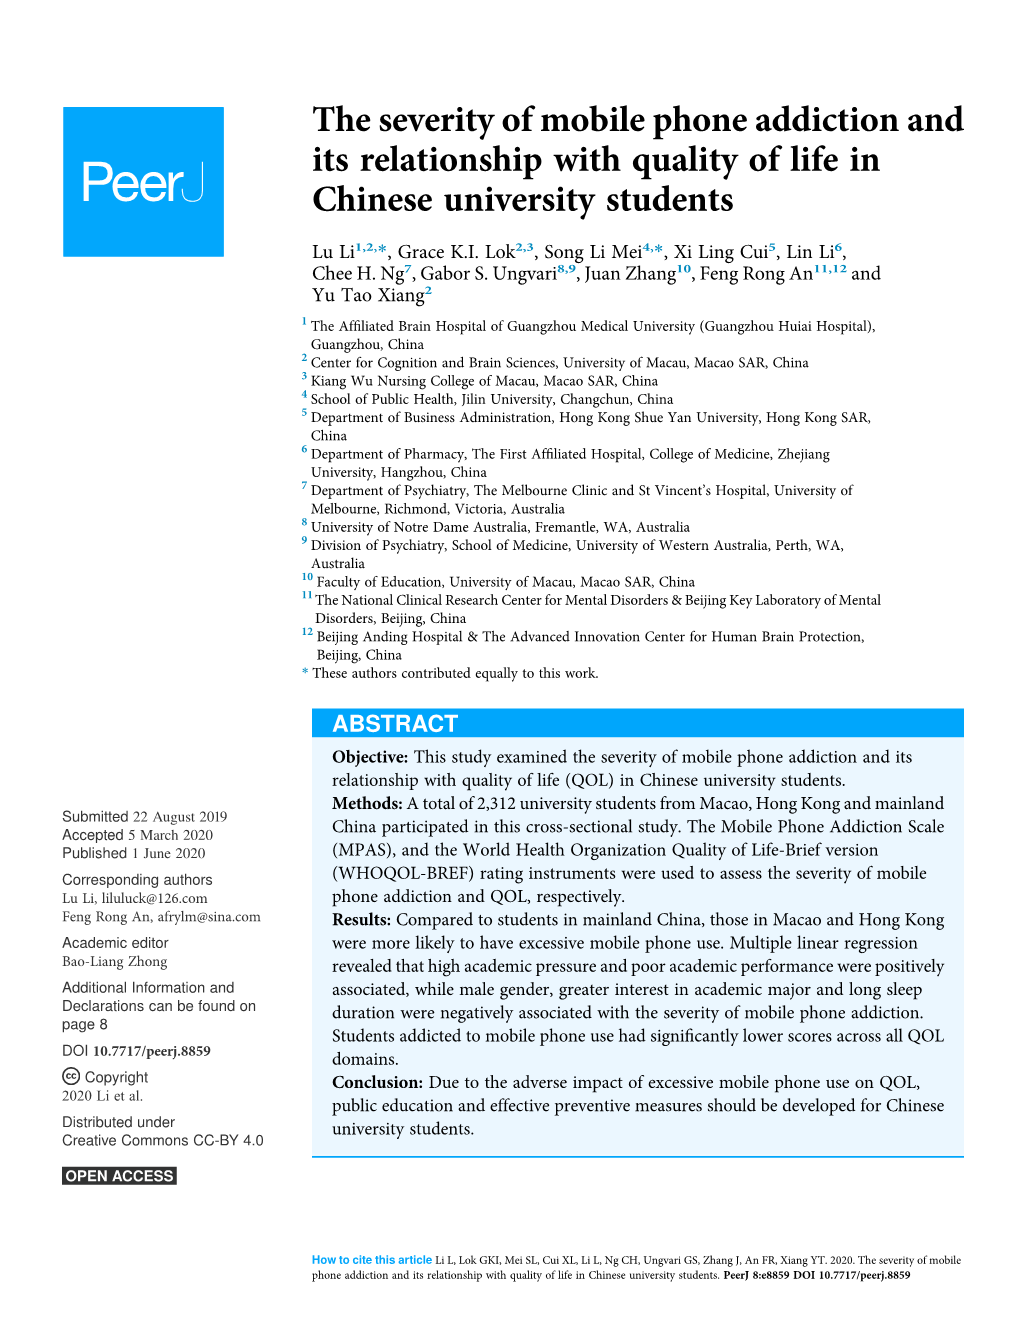 The Severity of Mobile Phone Addiction and Its Relationship with Quality of Life in Chinese University Students